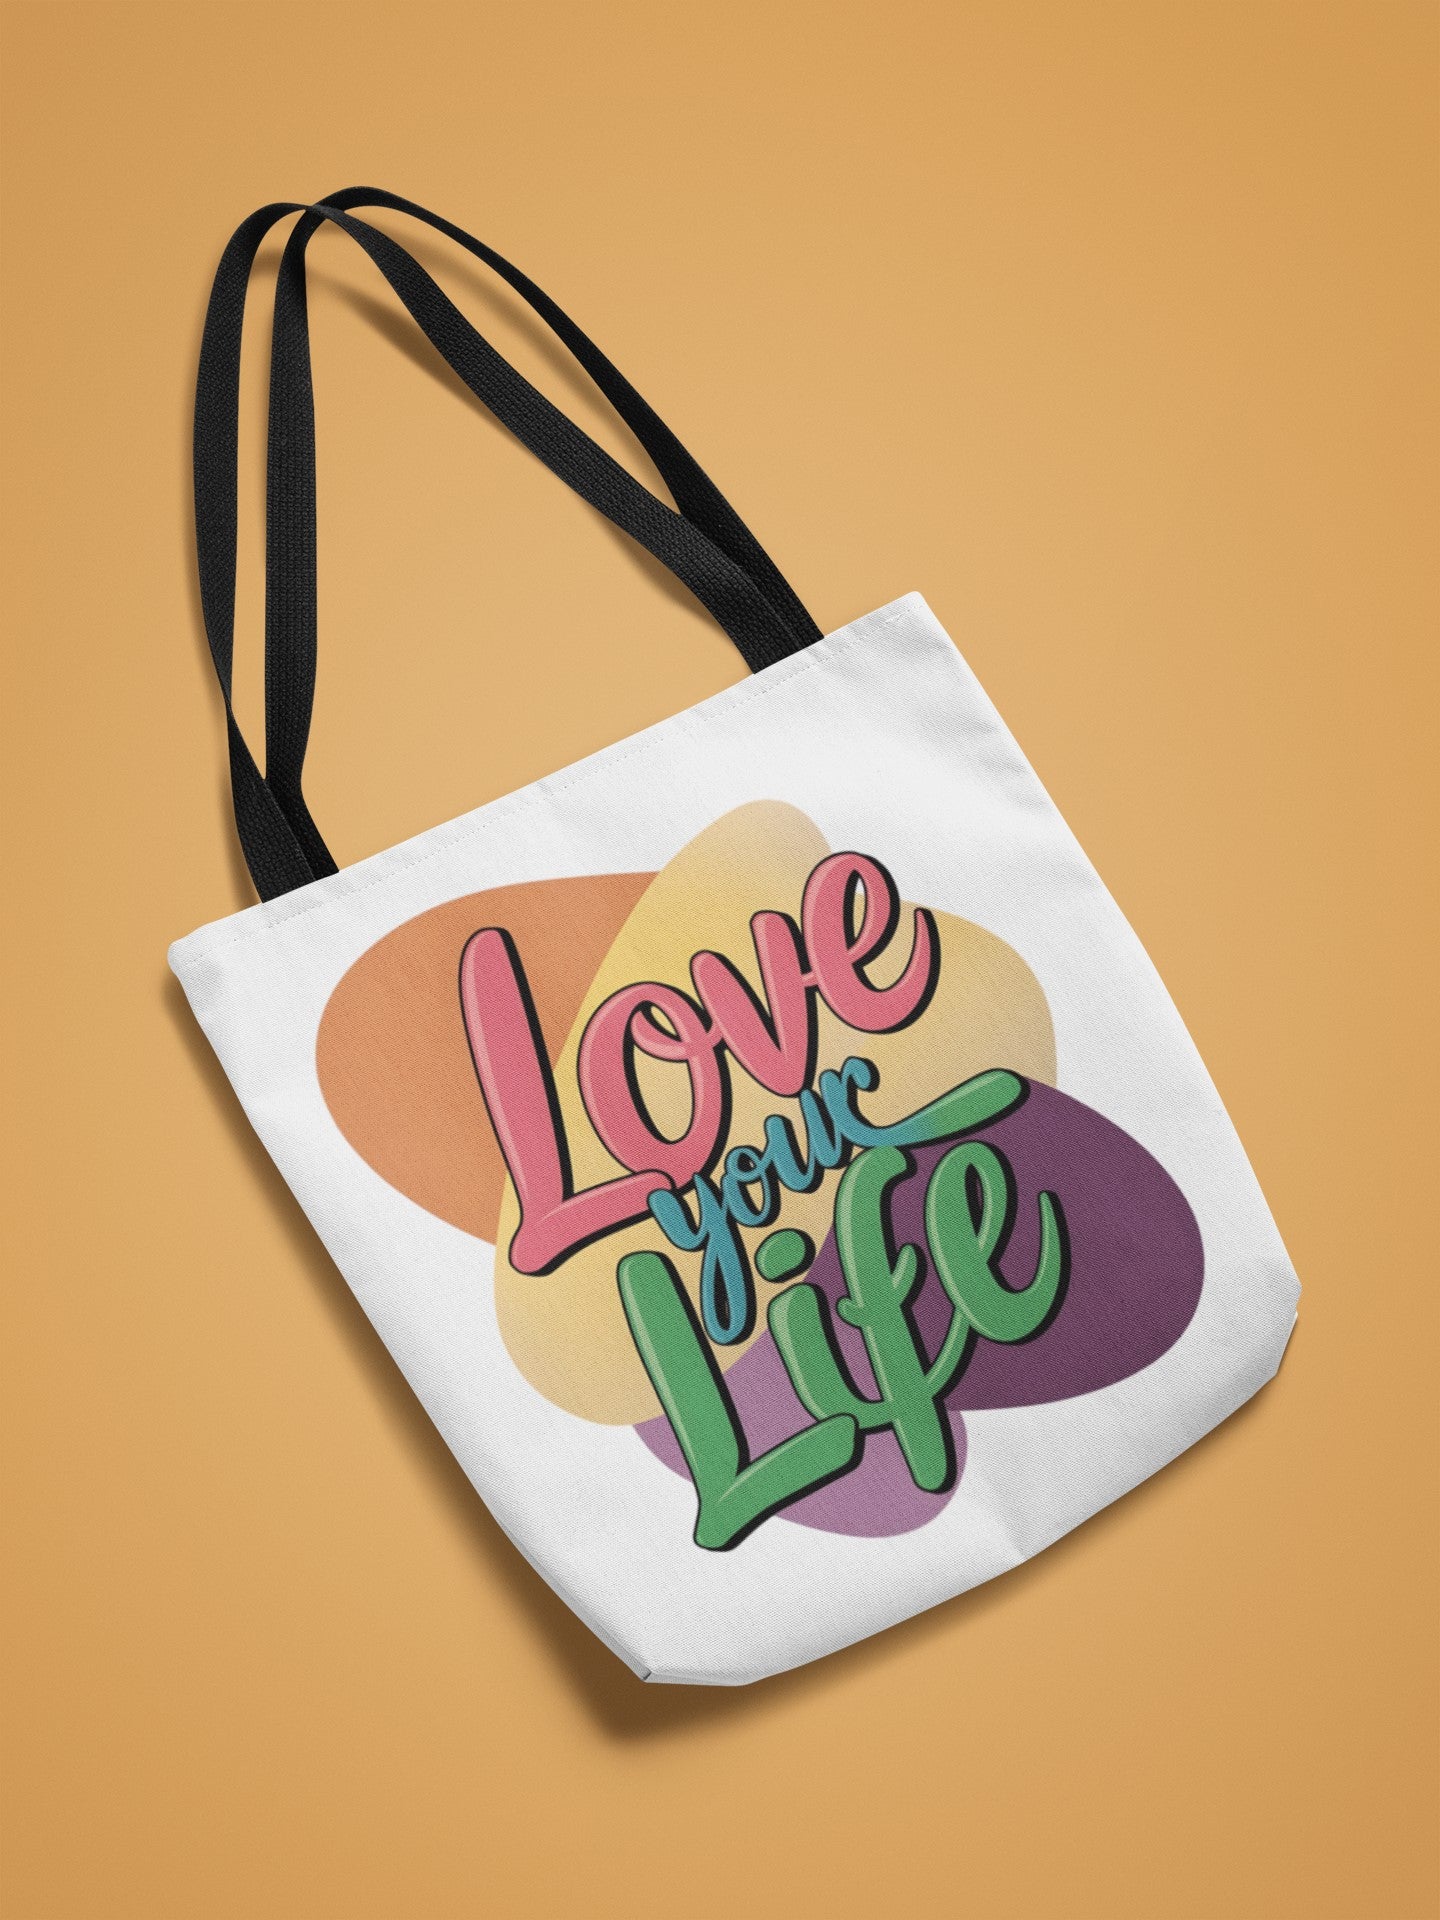 "Love your life"  Tote Bag